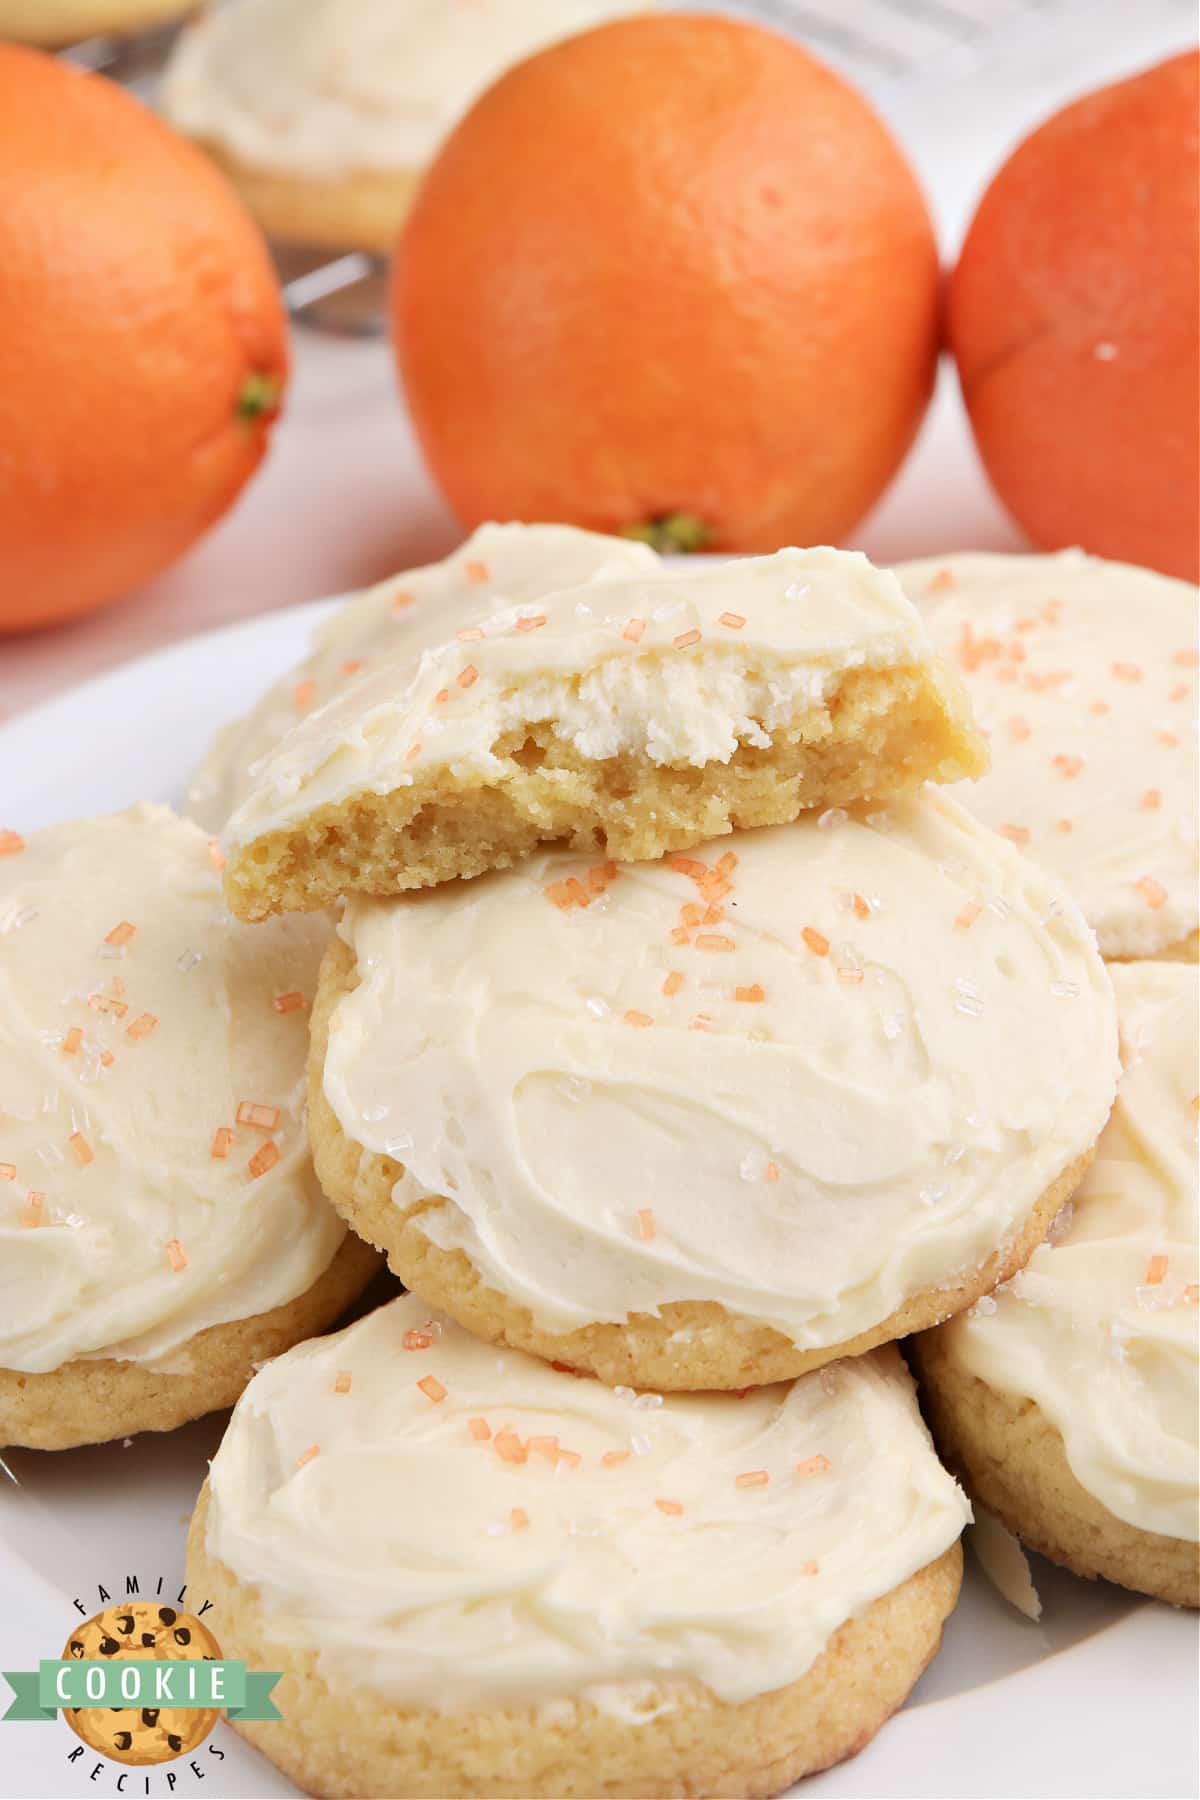 Frosted Orange Juice Cookies made with orange juice concentrate in both the cookies and the frosting! Simple orange cookie recipe packed with orange flavor!